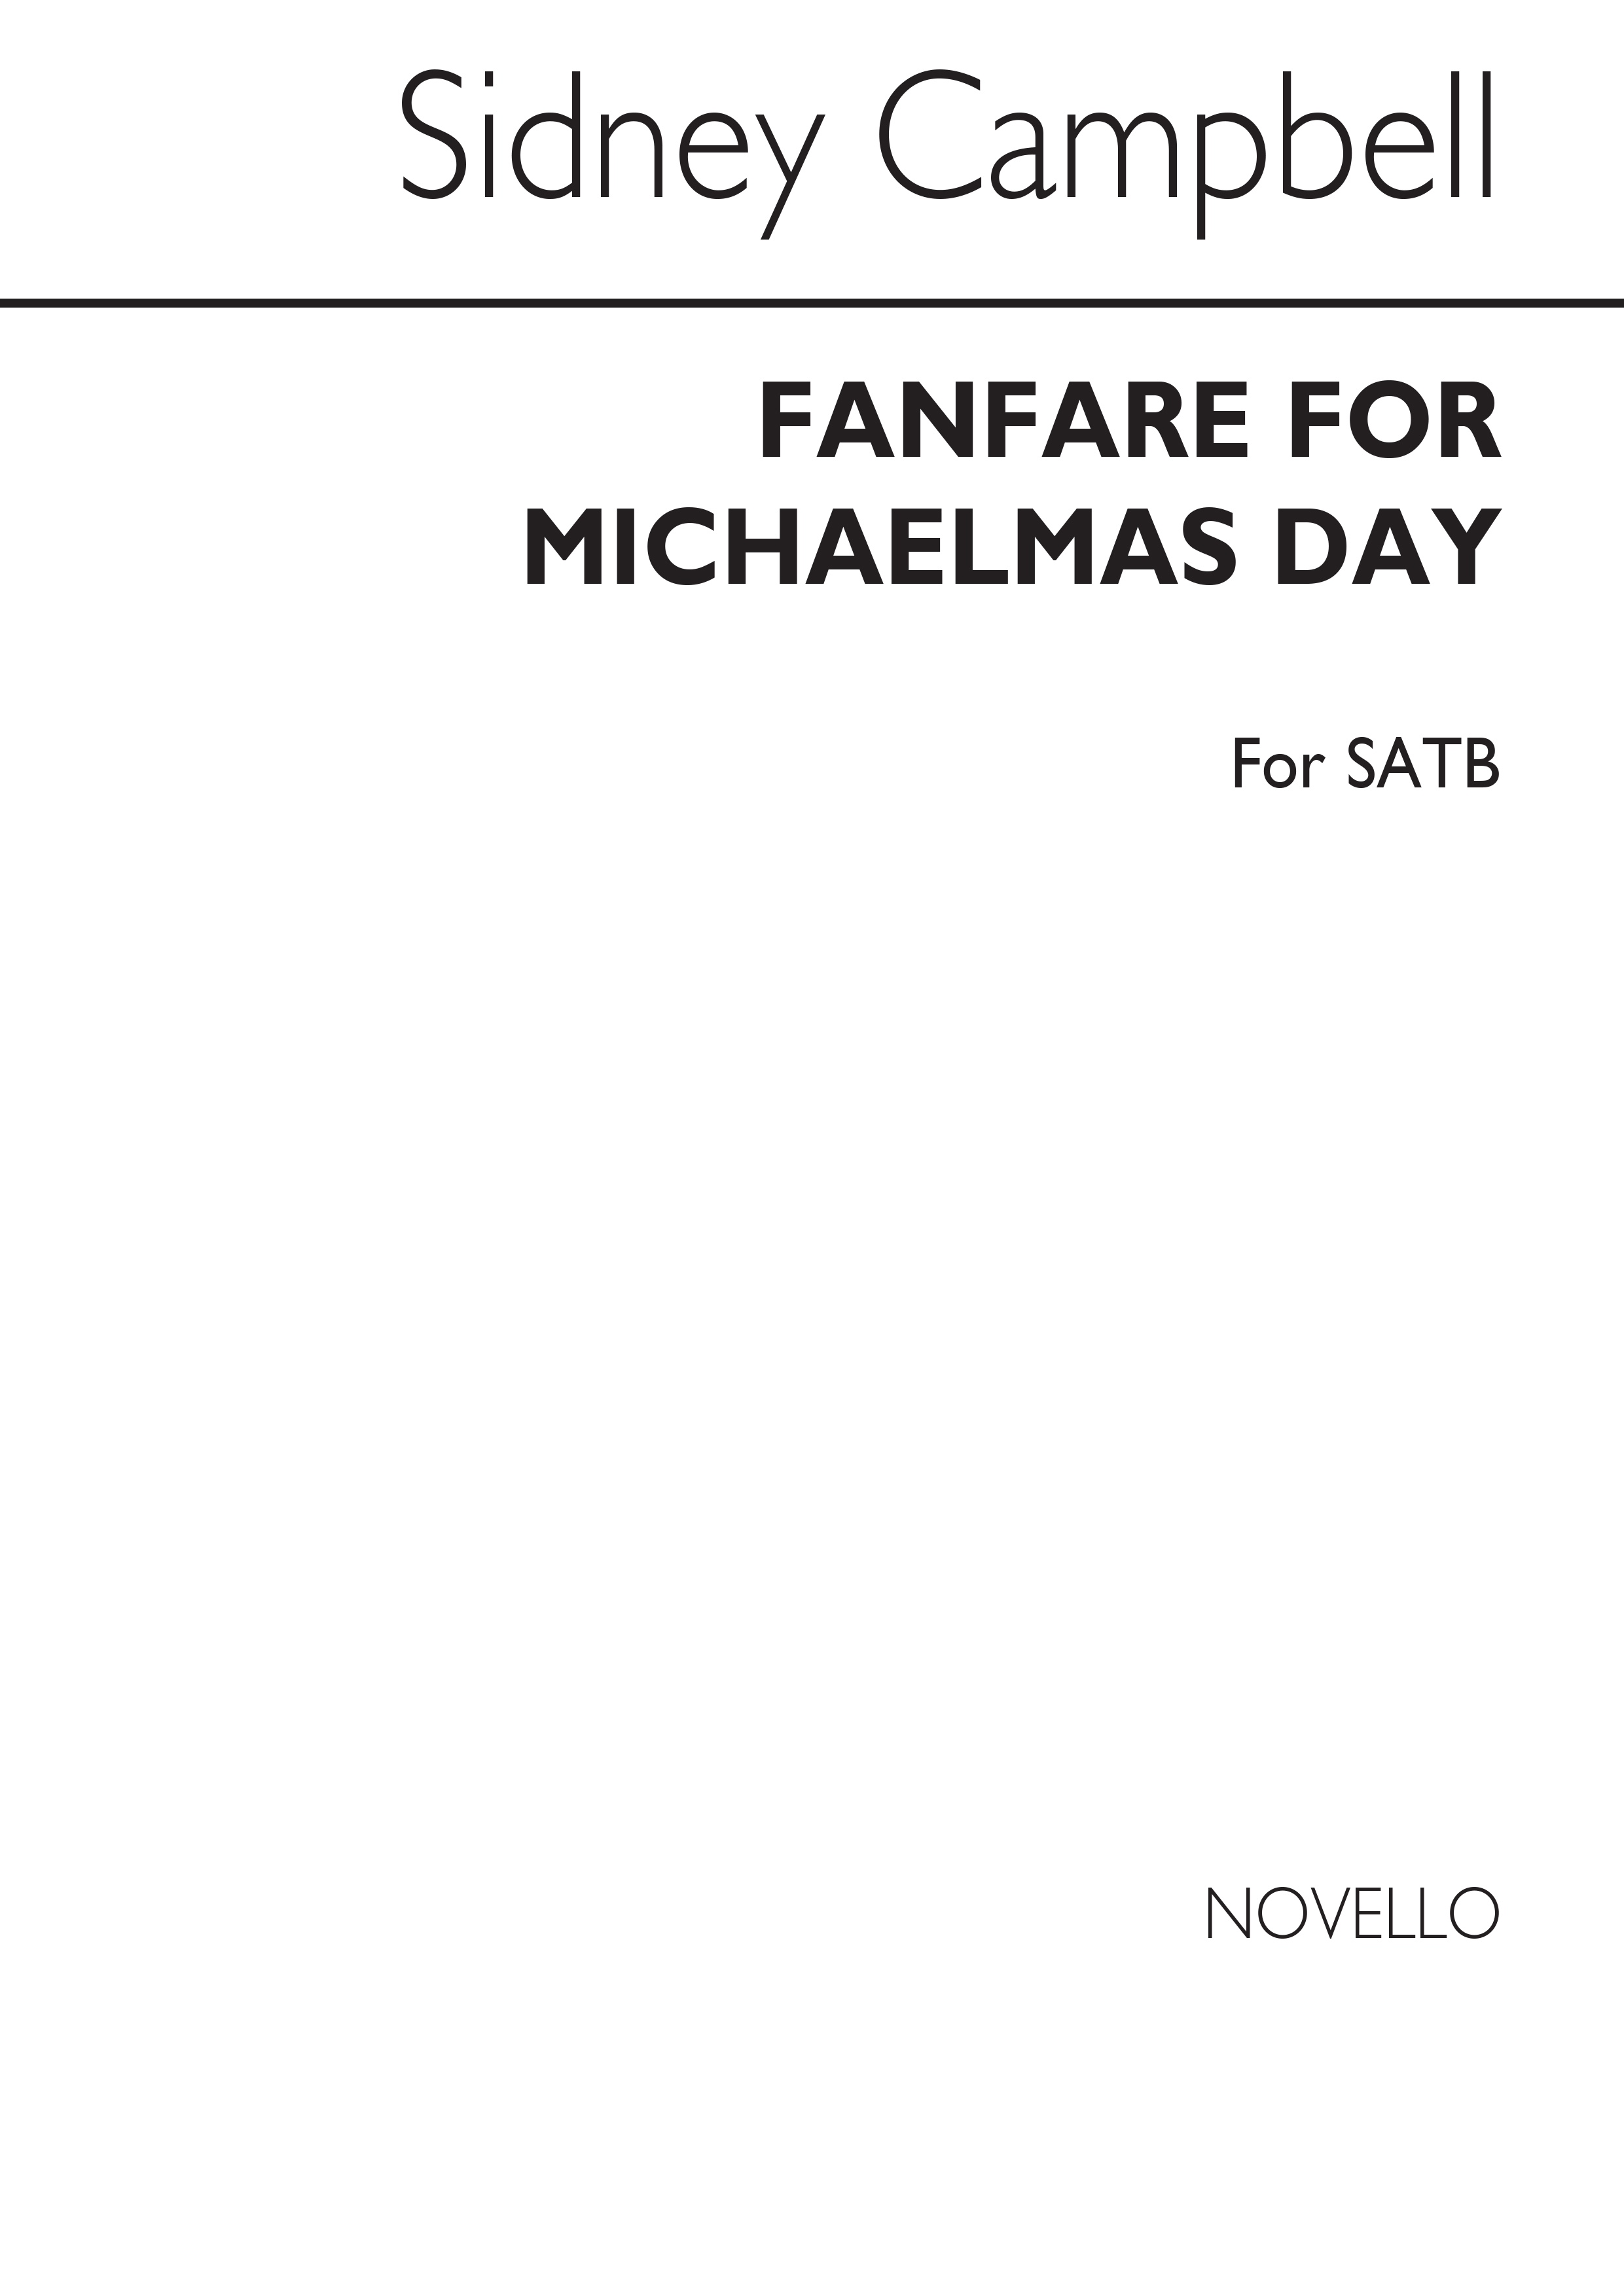 Sidney Campbell: Fanfare For Michaelmas for SATB Chorus